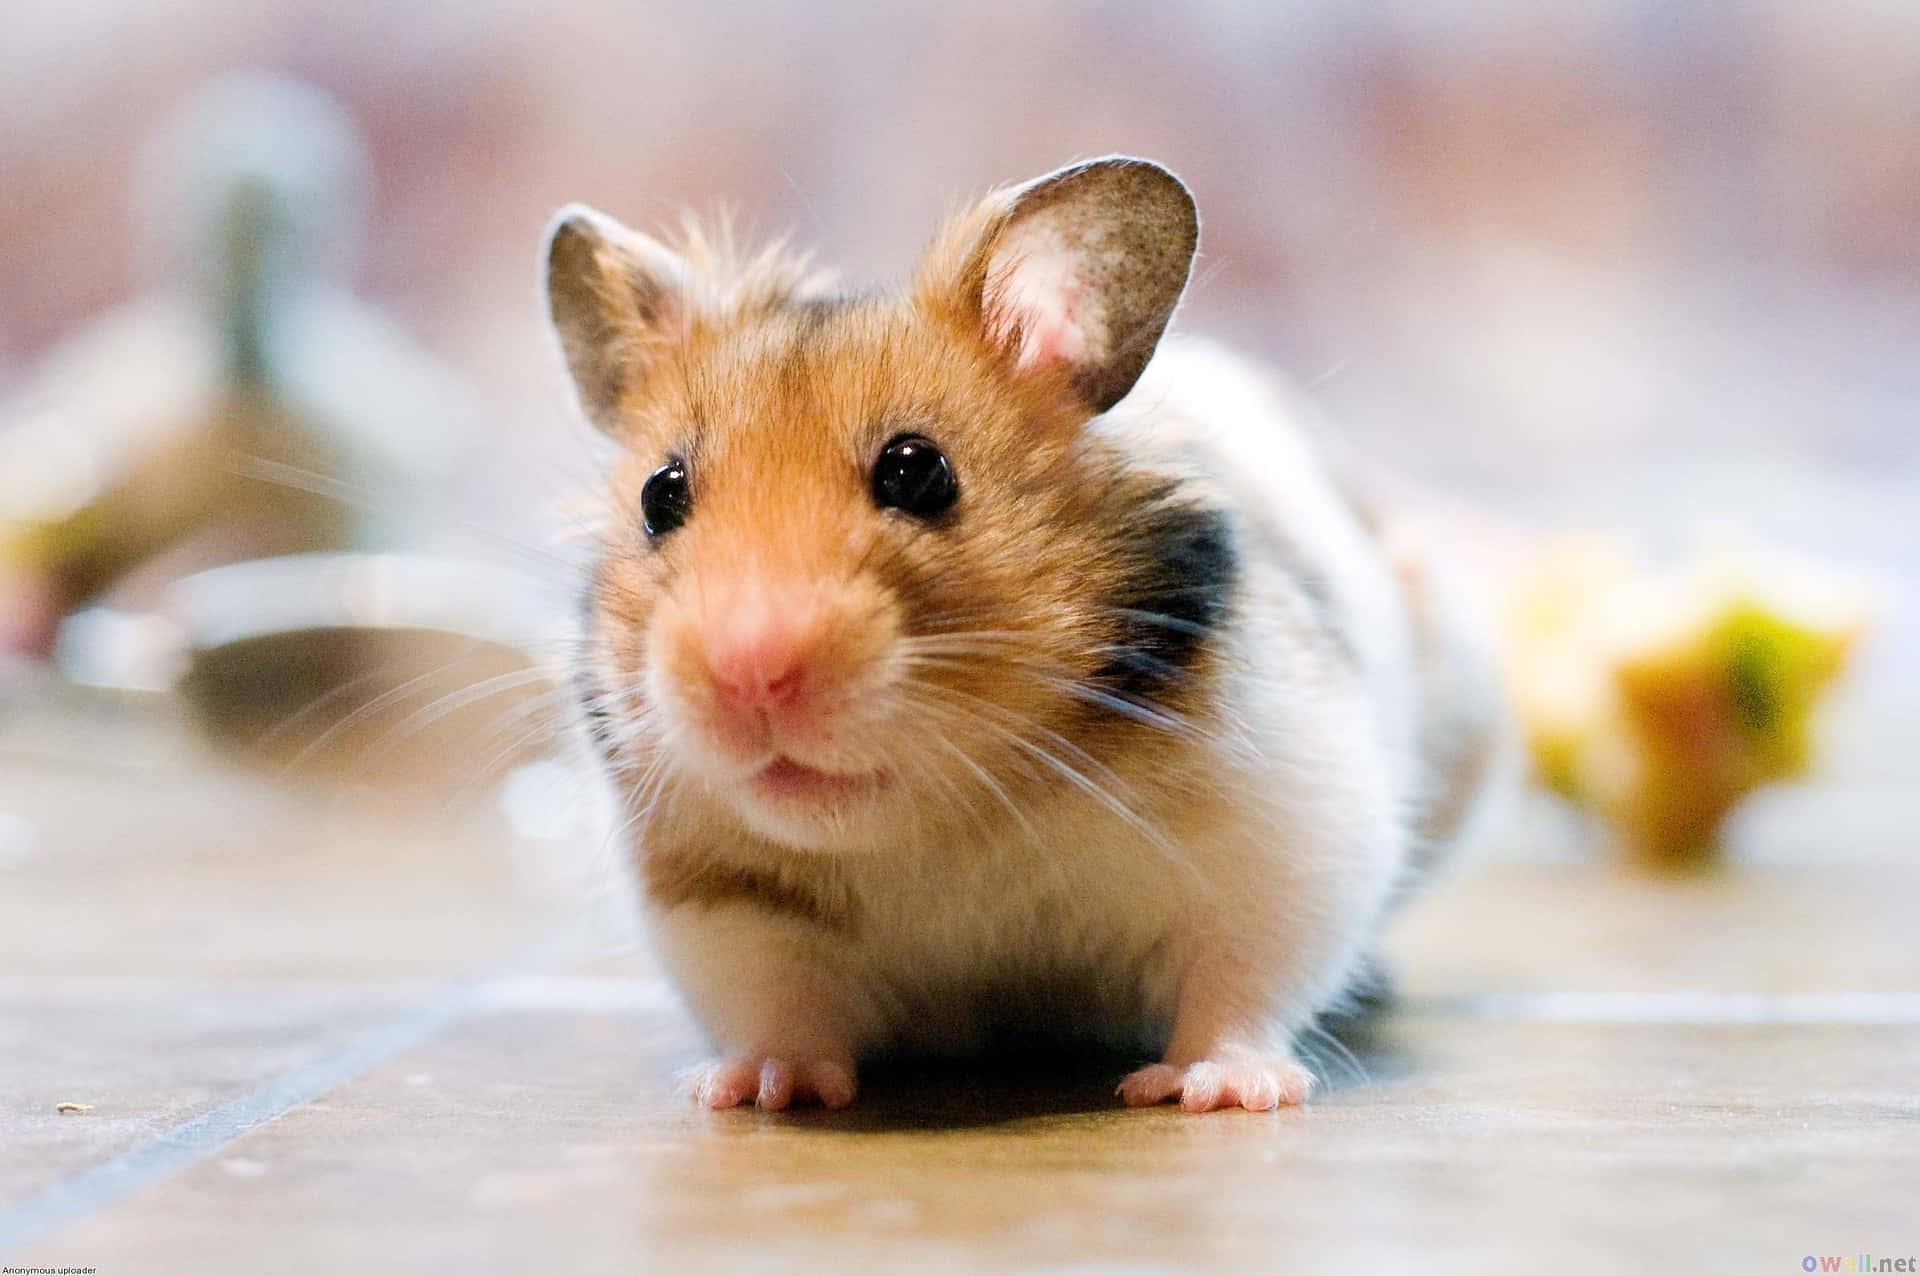 A Hamster Is Standing On A Tile Floor Background